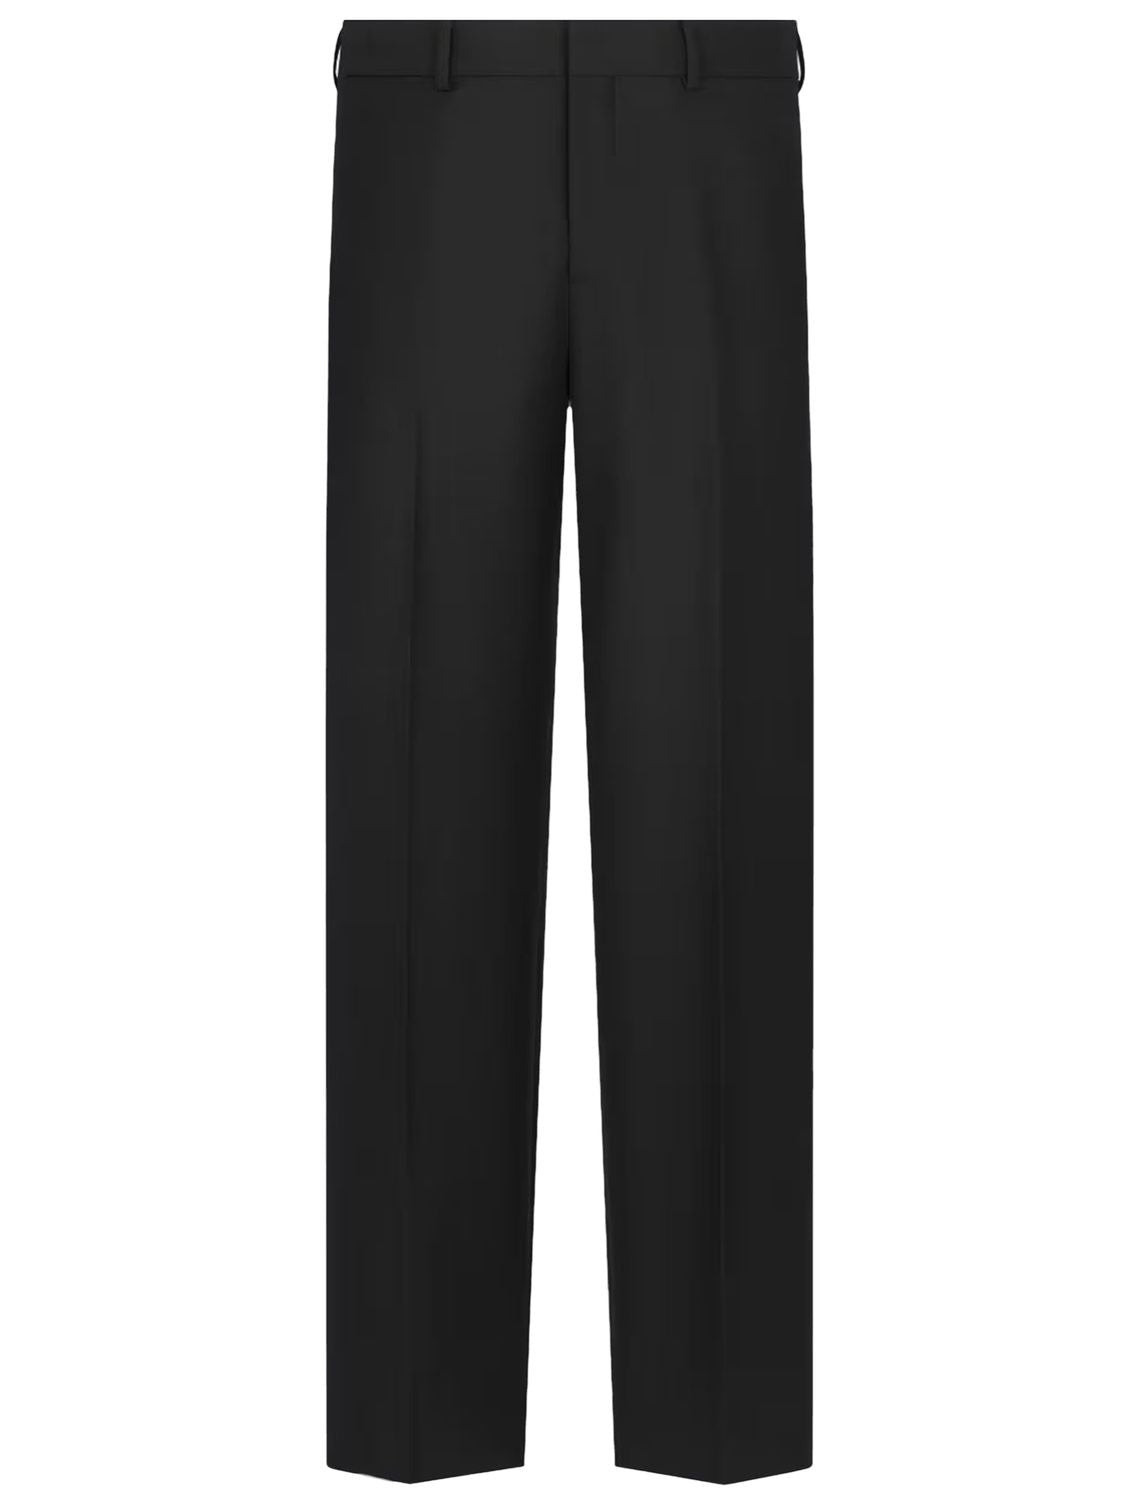 Dior Men's Black Twill Trousers With V-shaped Detail And Regular Fit